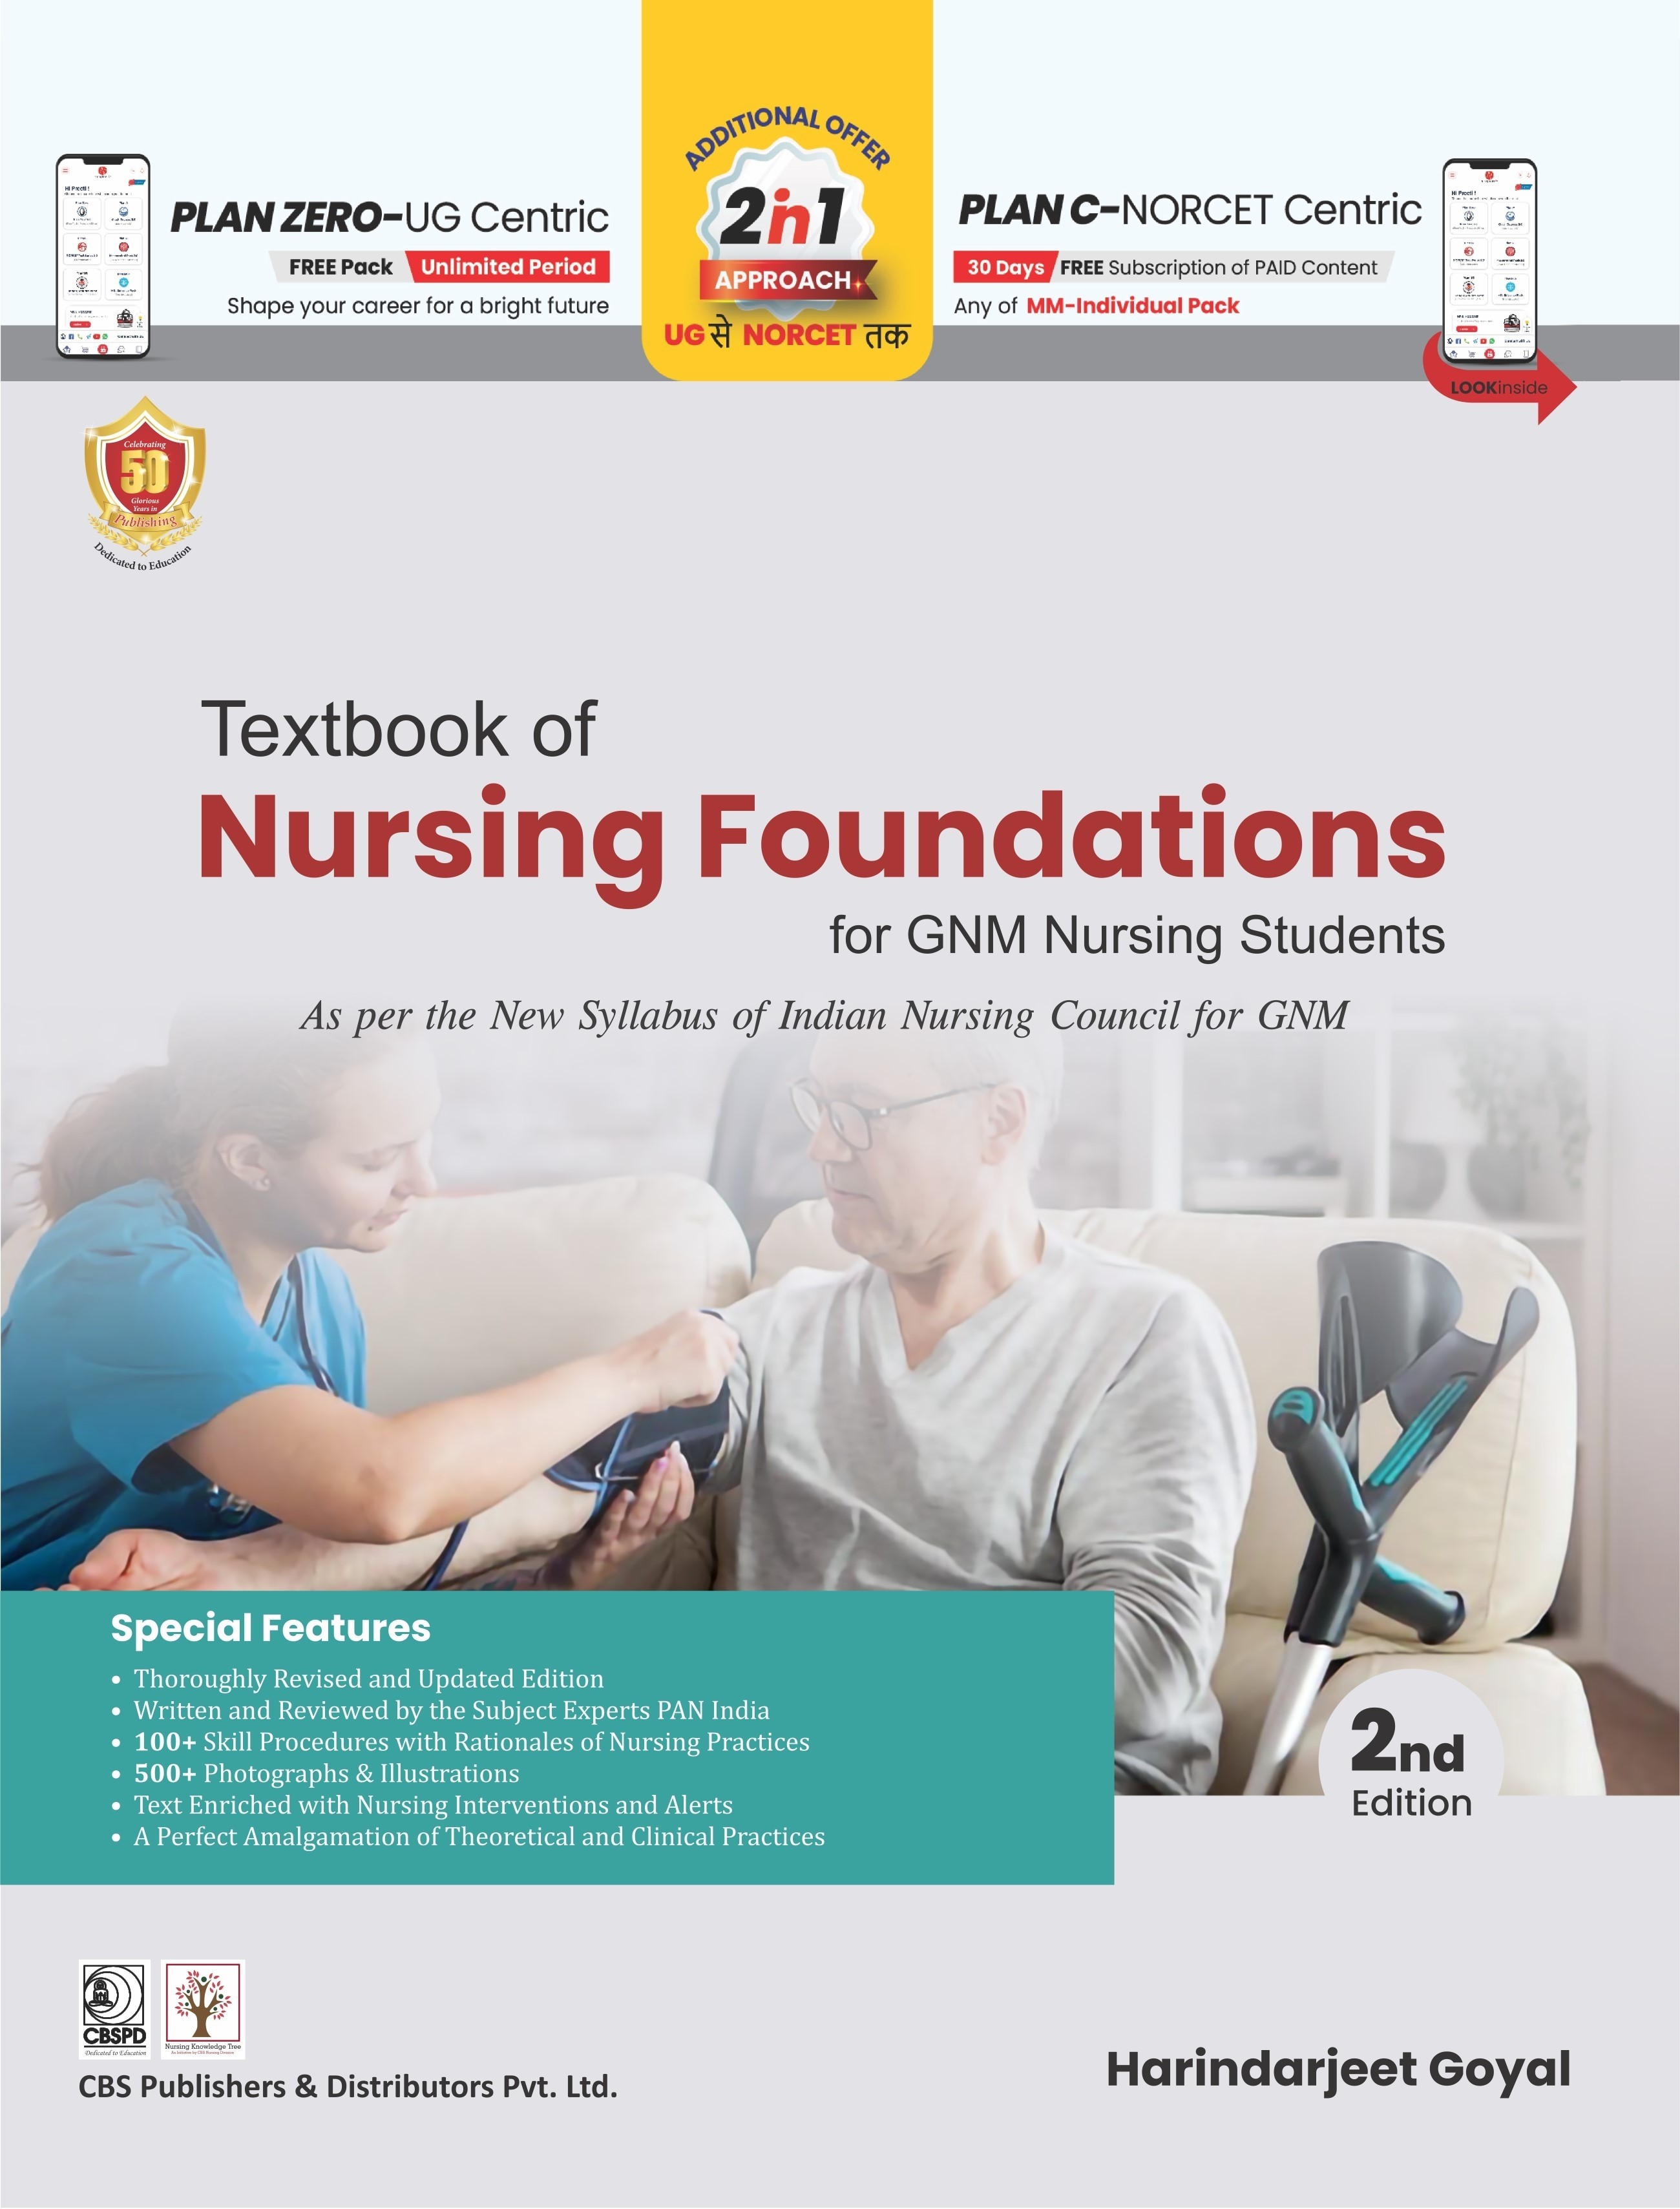 Textbook of  Nursing Foundations For GNM Nursing Students As per the New Syllabus of Indian Nursing Council for GNM)